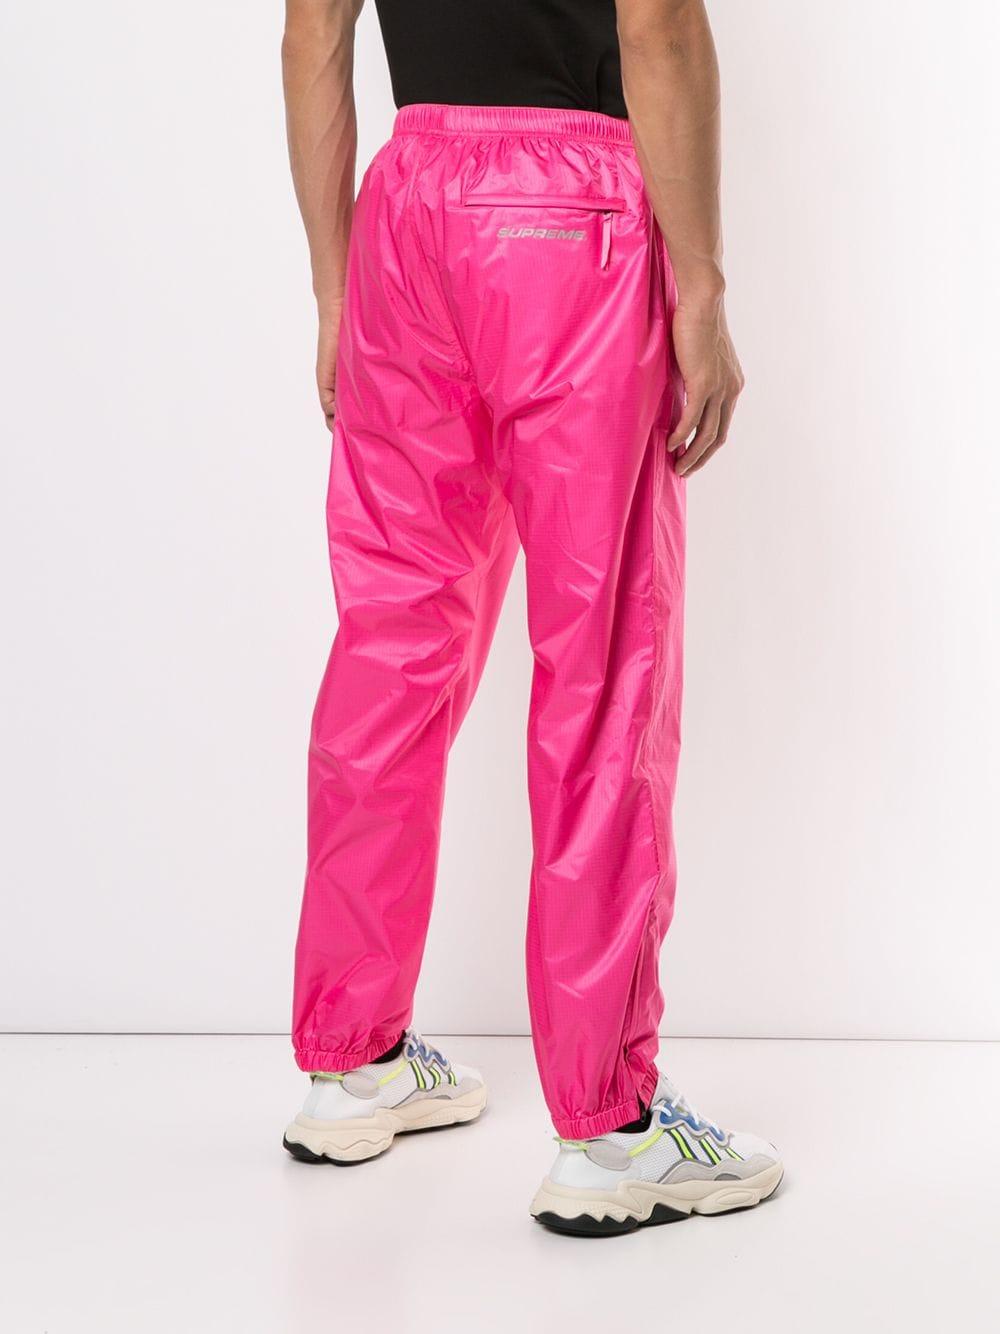 Supreme Packable Ripstop Track Pants in Pink for Men - Lyst